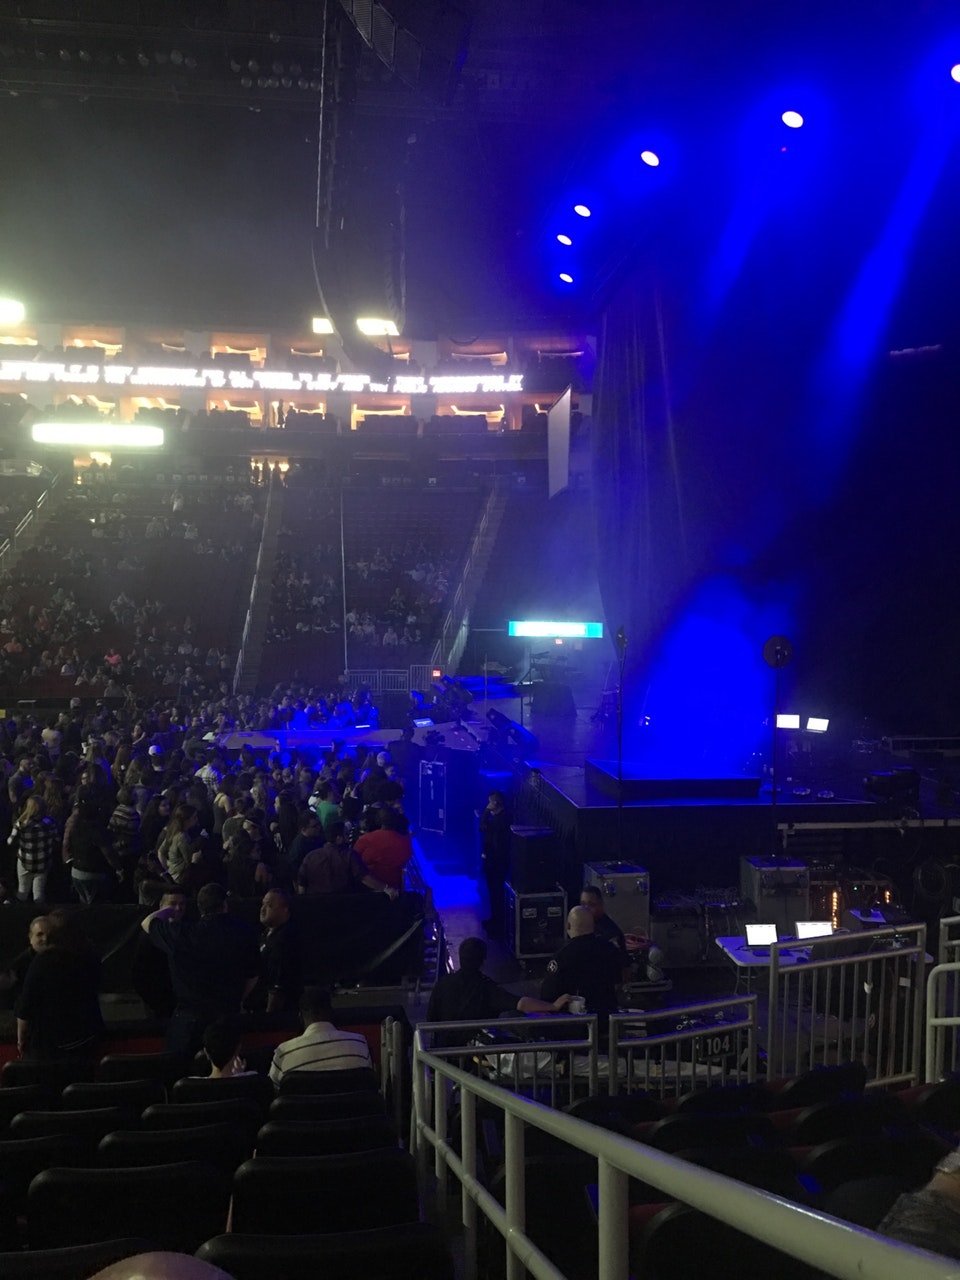 section 105, row 8 seat view  for concert - toyota center